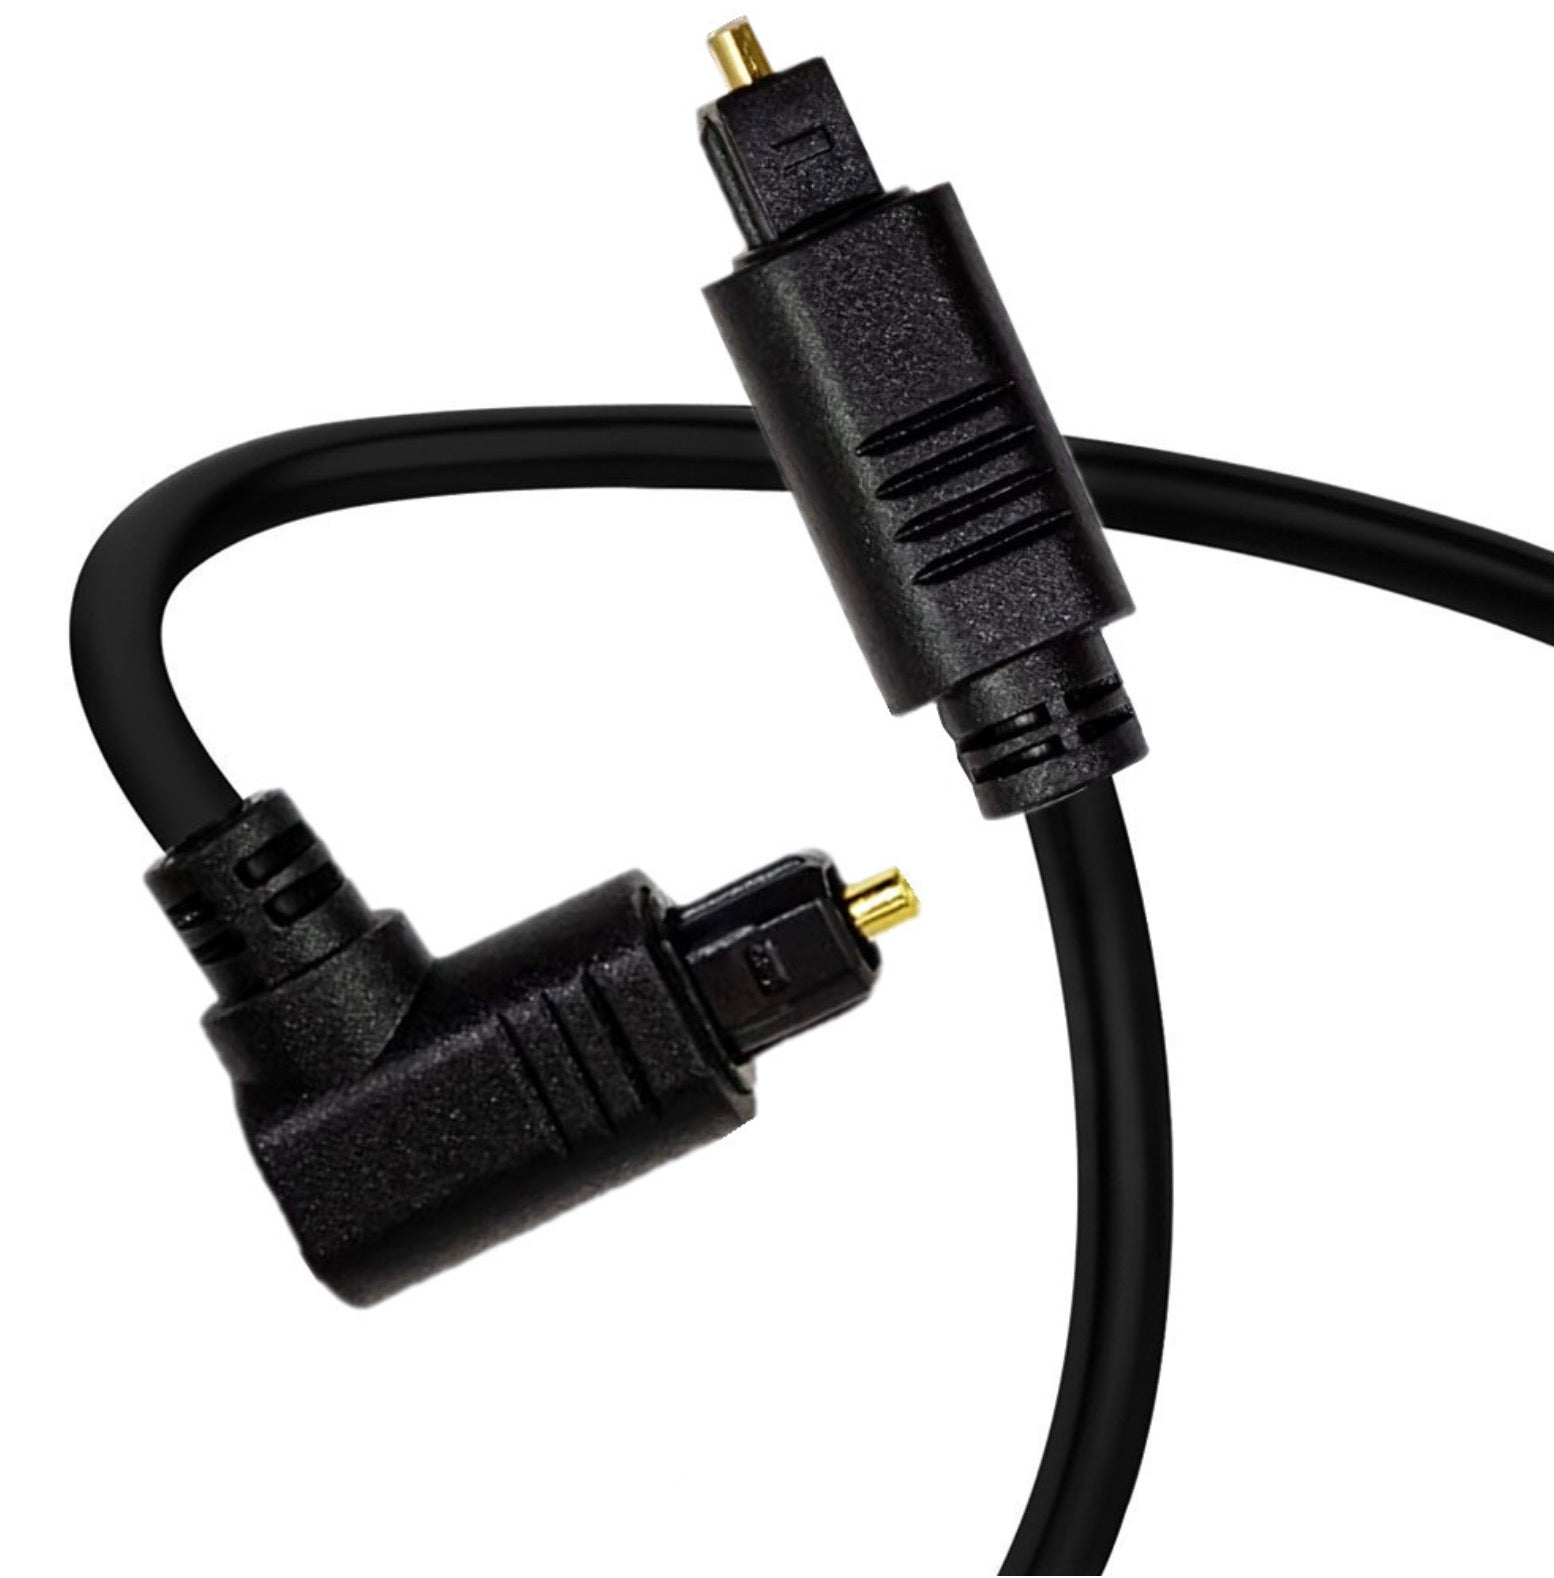 Toslink Optical Male to Male Angled Audio Cable for Sound Bars and Home Theatre Systems